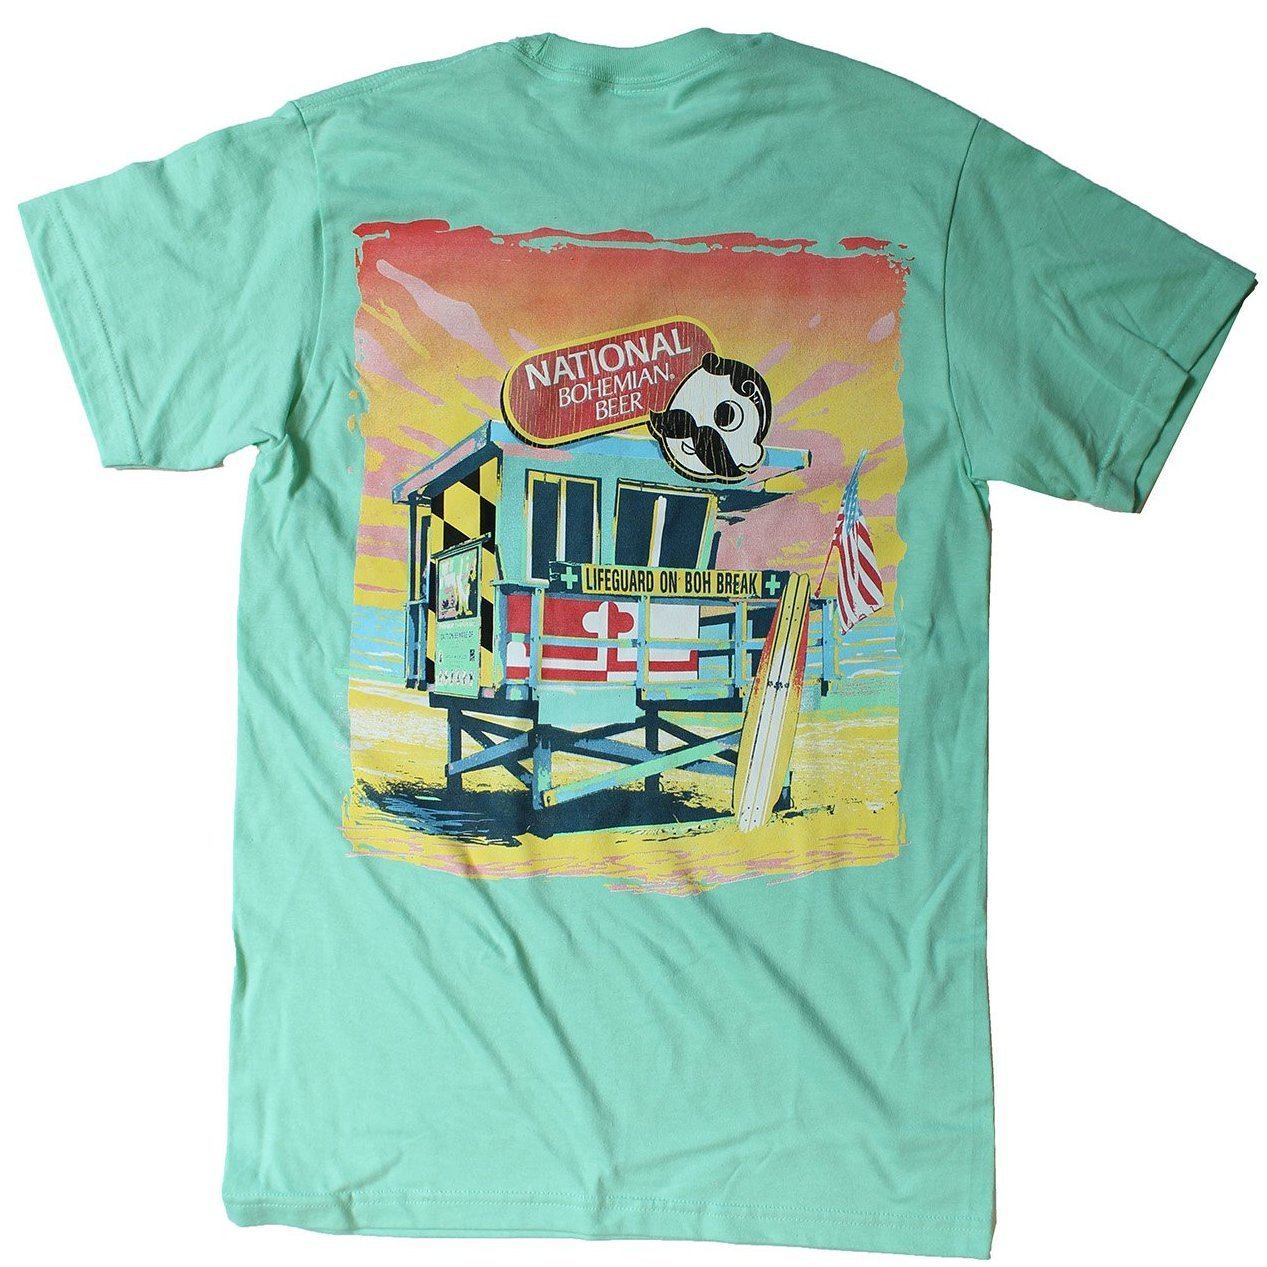 Natty Boh Lifeguard Stand (Island Reef) / Shirt - Route One Apparel